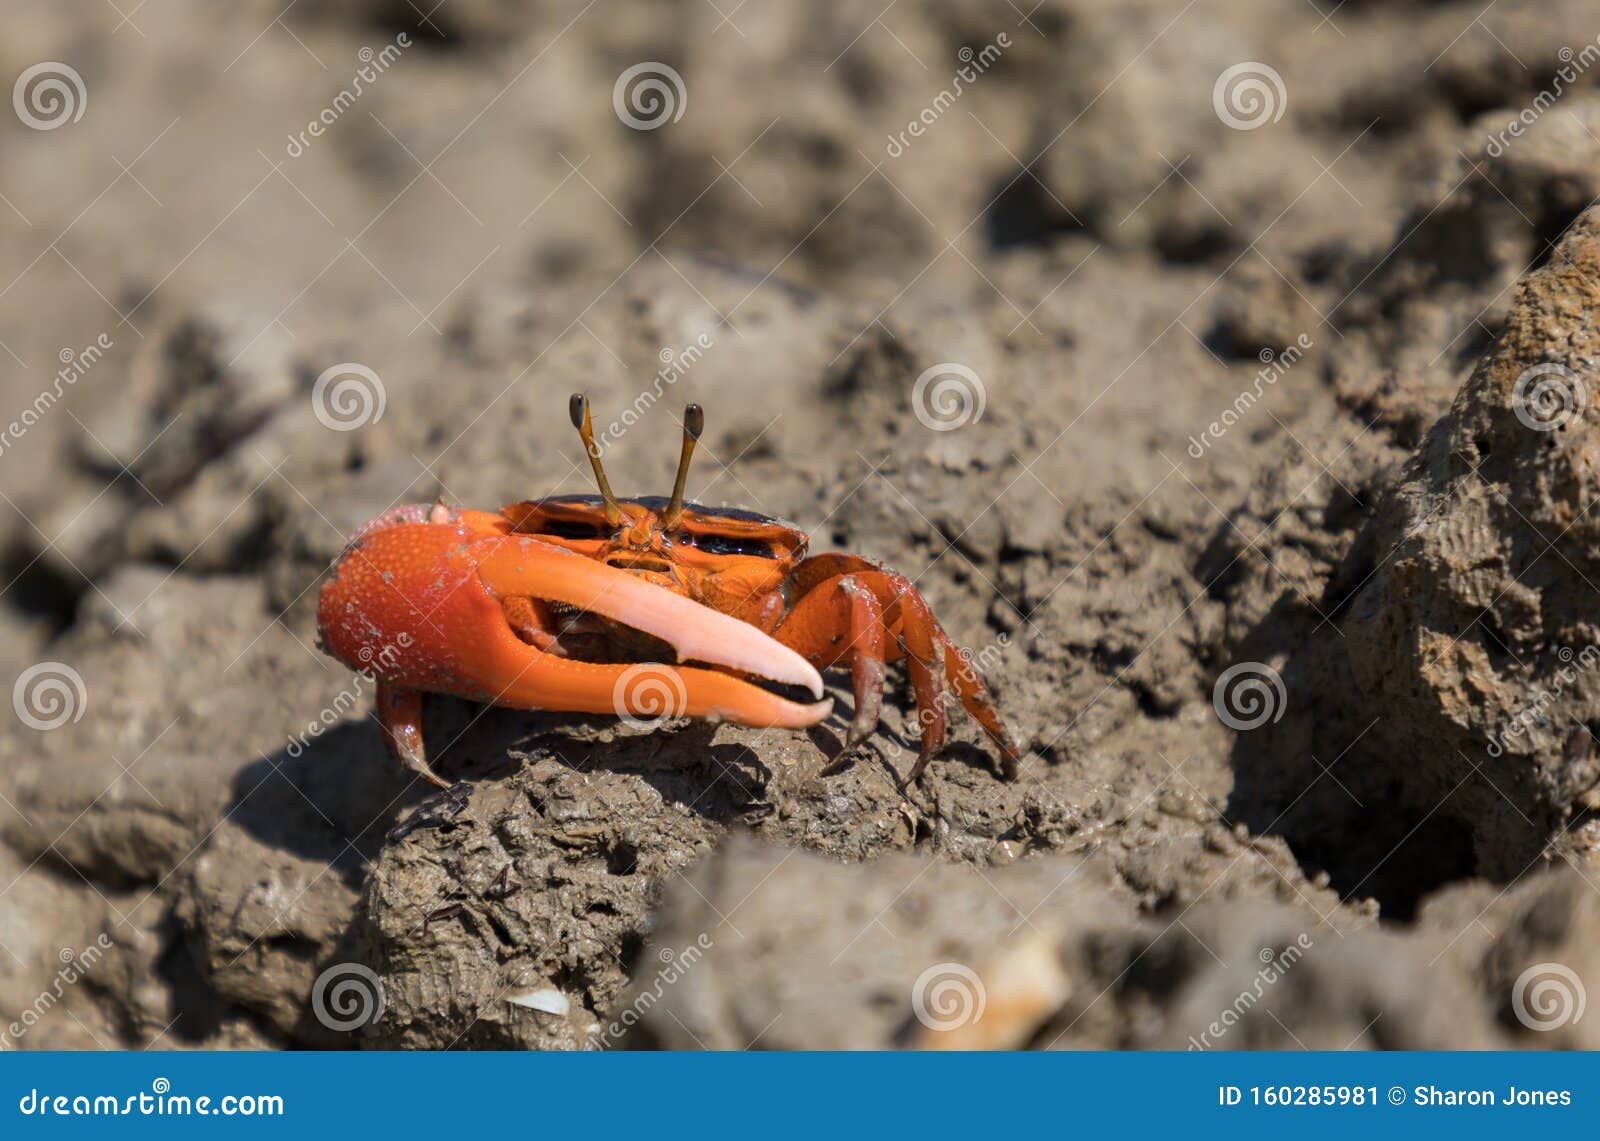 The Flame-backed Fiddler Crab, or Uca Flammula, Also Called the Darwin  Red-legs Near Burrow in Mudflat Stock Image - Image of flame, mudflat:  160285981